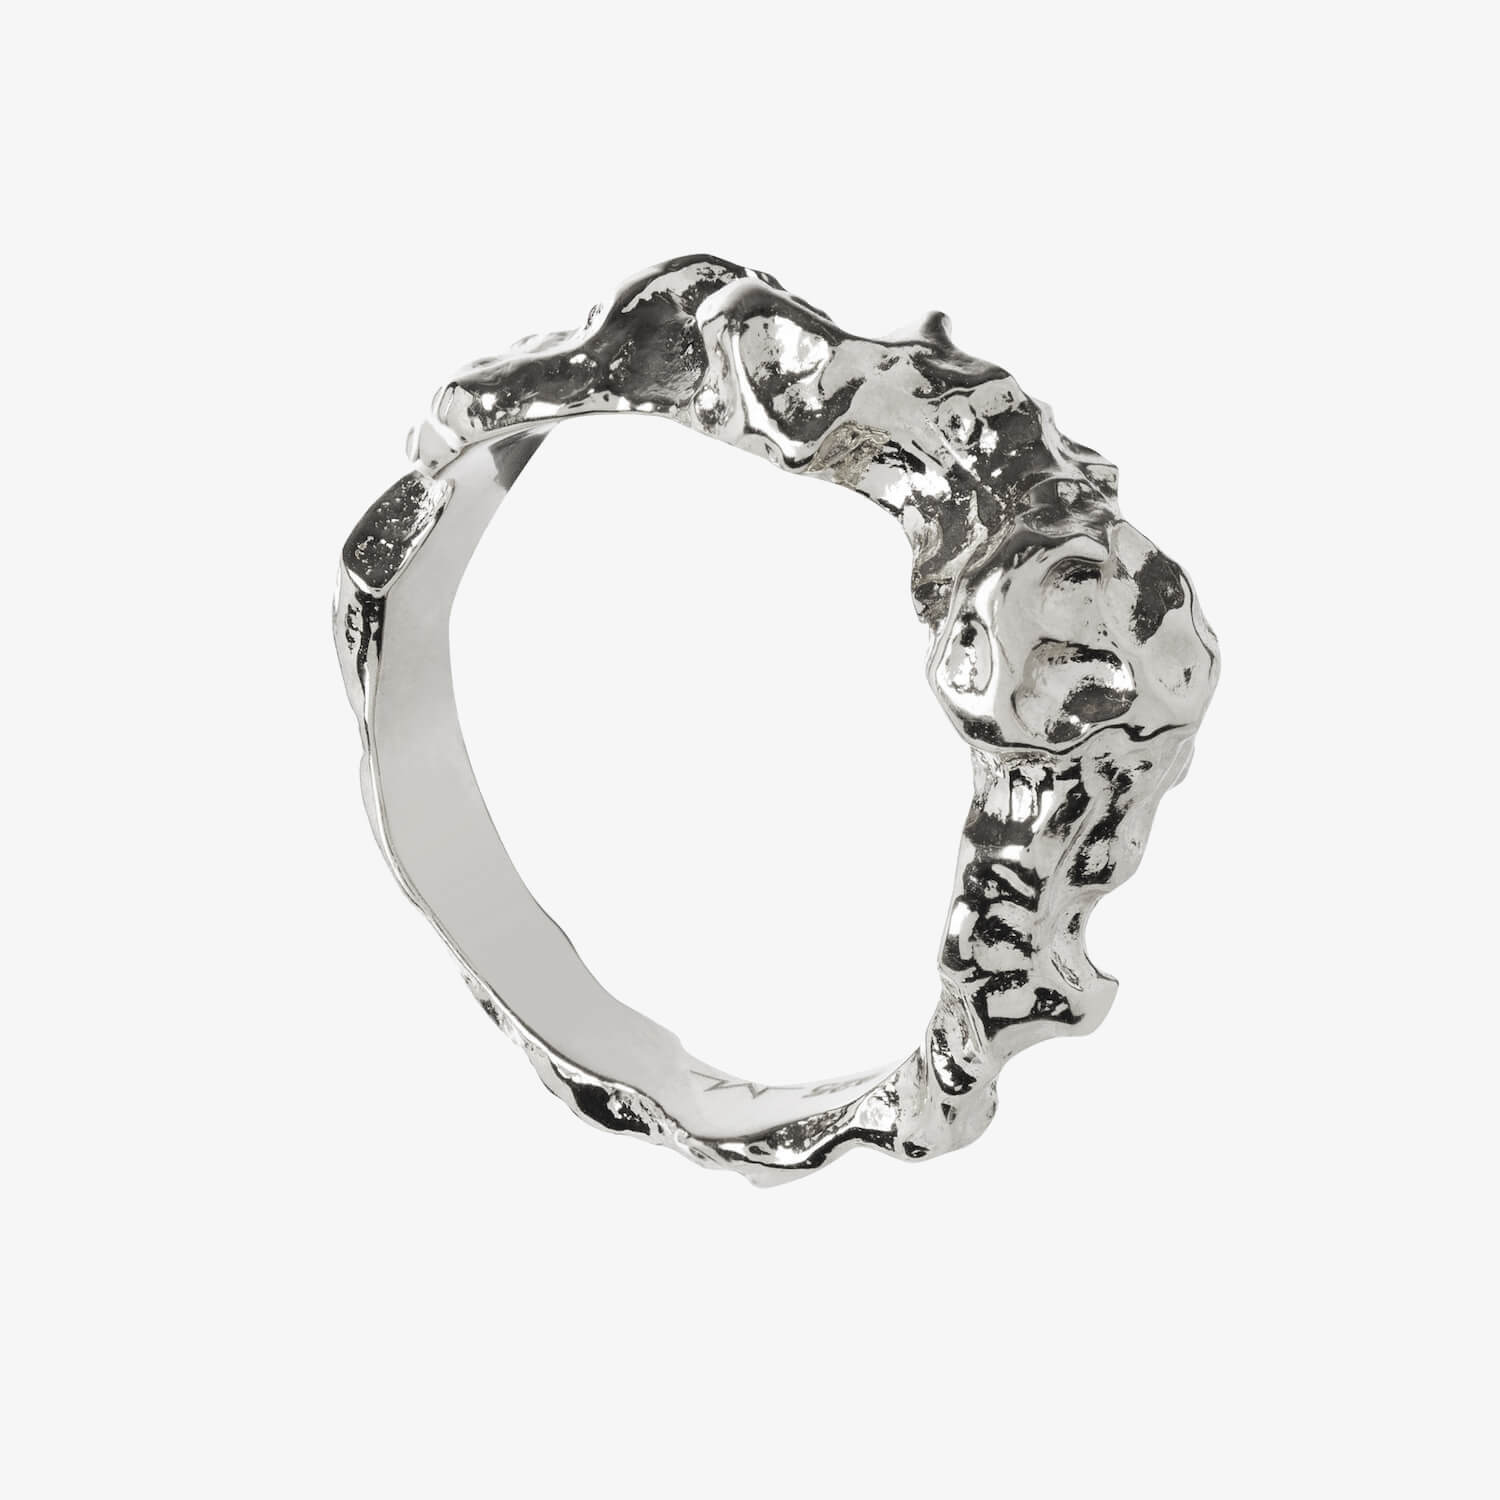 Sterling silver ring with heavy detailed textures